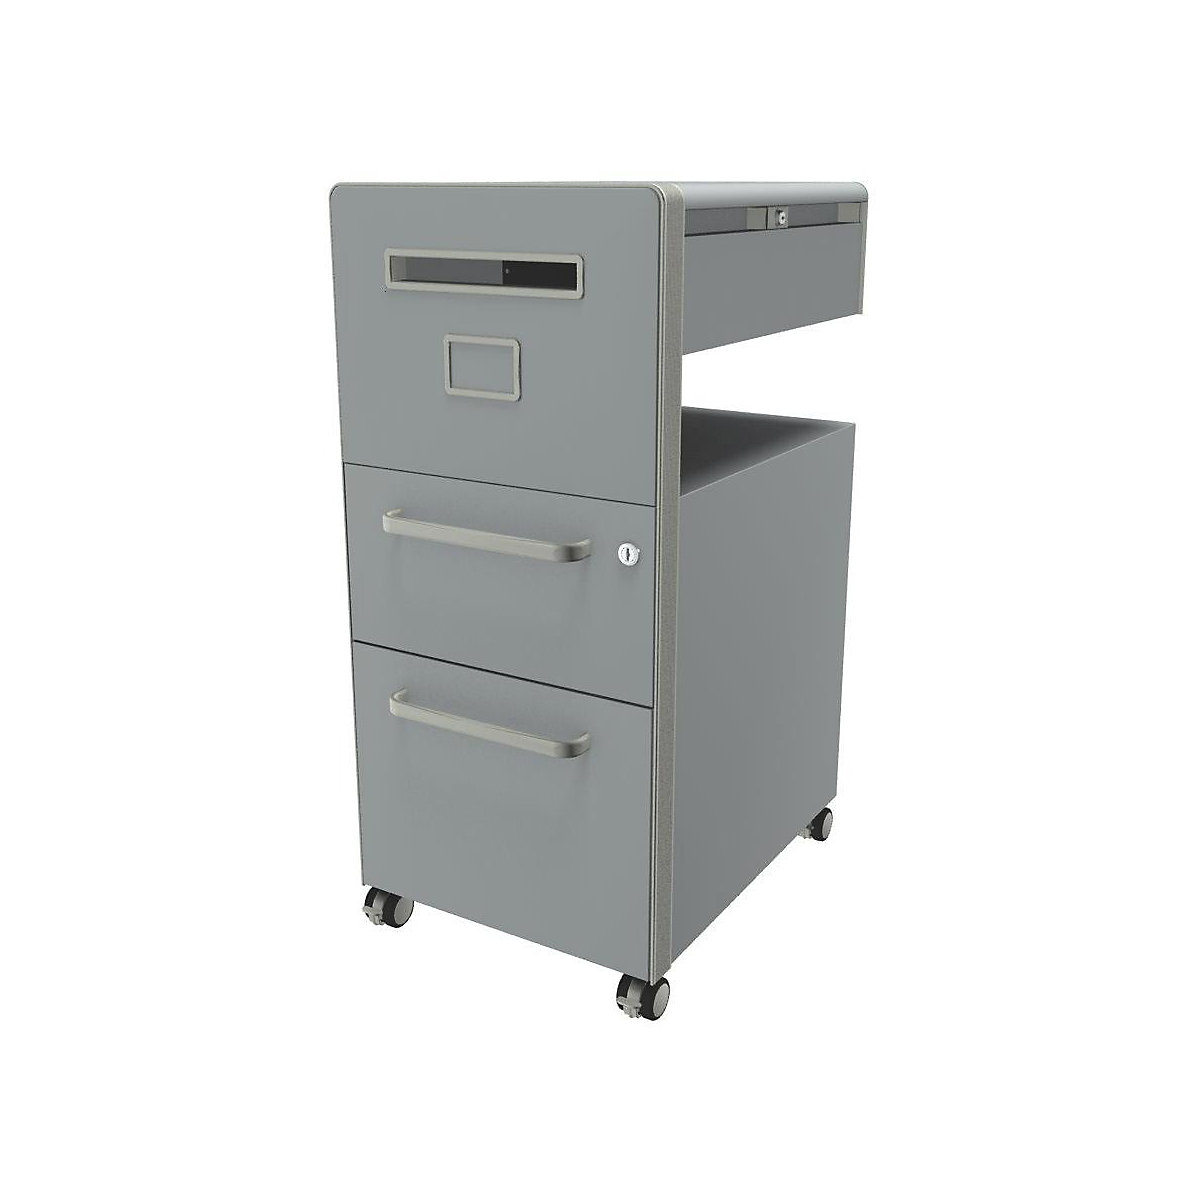 Bite™ pedestal furniture, with 1 pin board, opens on the left side – BISLEY, with 1 universal drawer, 1 suspension file drawer, silver, smooth paint finish-21